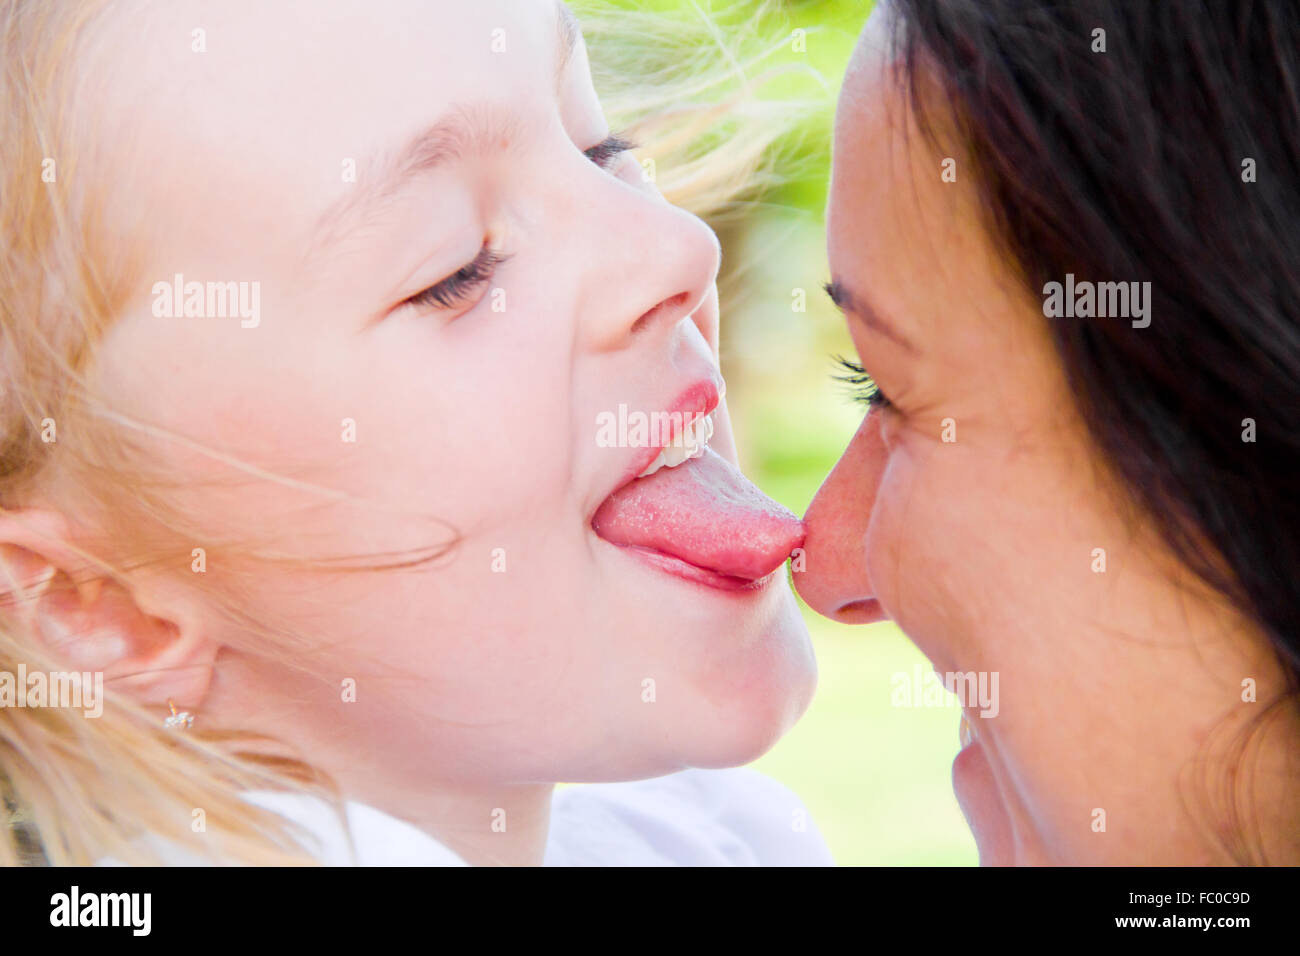 Mother and daughter kissing gif